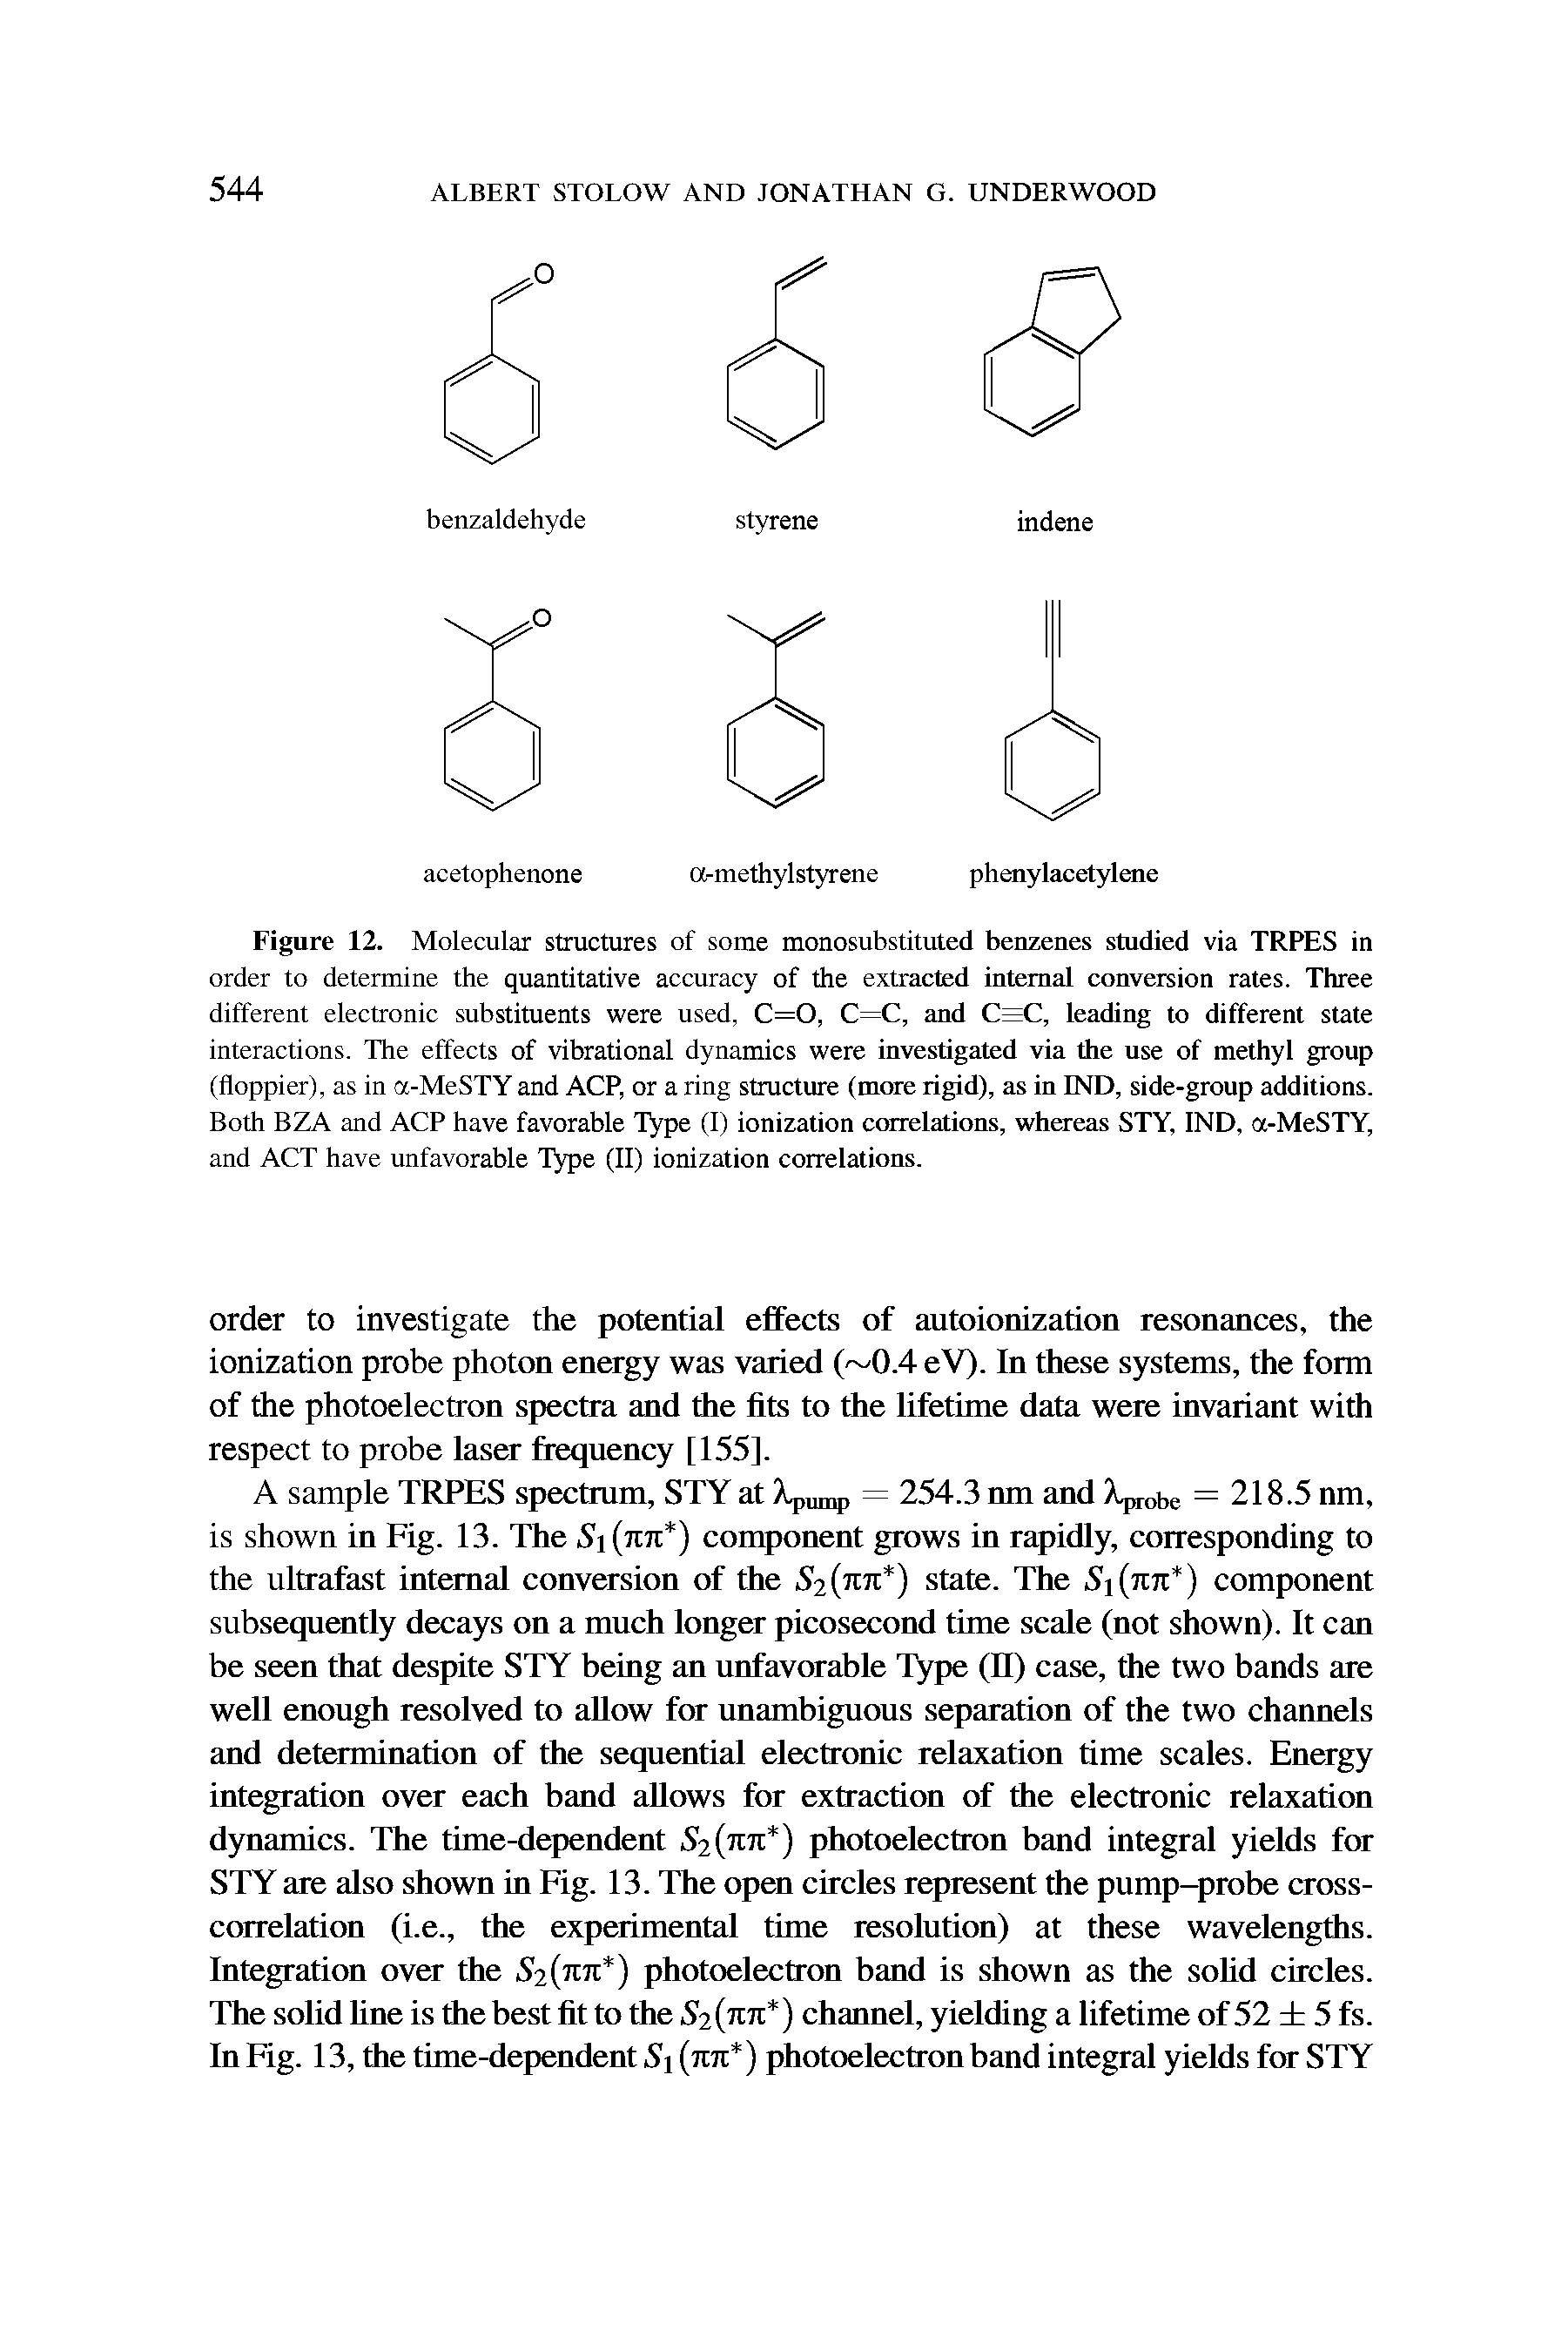 Figure 12. Molecular structures of some monosubstituted benzenes studied via TRPES in order to determine the quantitative accuracy of the extracted internal conversion rates. Three different electronic substituents were used, C=0, C=C, and C=C, leading to different state interactions. The effects of vibrational dynamics were investigated via the use of methyl group (floppier), as in a-MeSTY and ACP, or a ring structure (more rigid), as in IND, side-group additions. Both BZA and ACP have favorable Type (I) ionization correlations, whereas STY, IND, a-MeSTY, and ACT have unfavorable Type (II) ionization correlations.